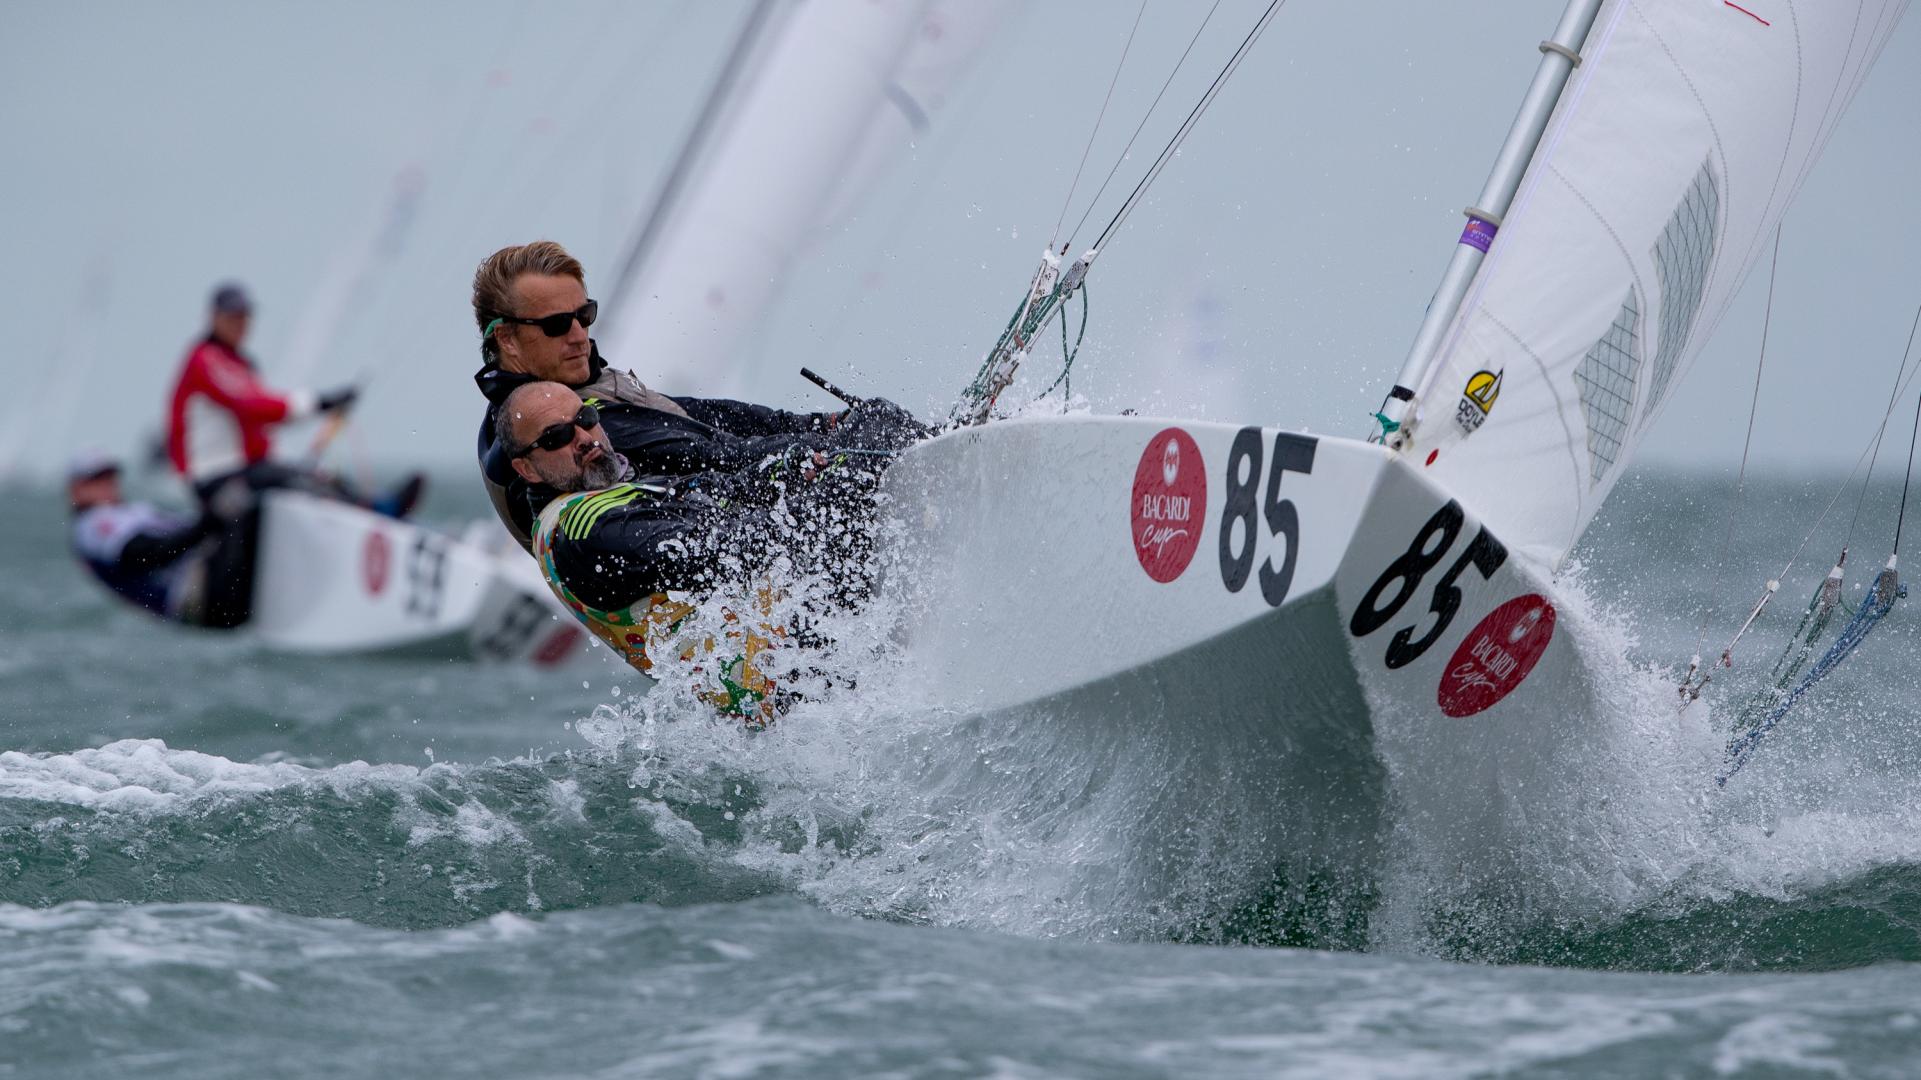 The 94th Bacardi Cup on Biscayne Bay